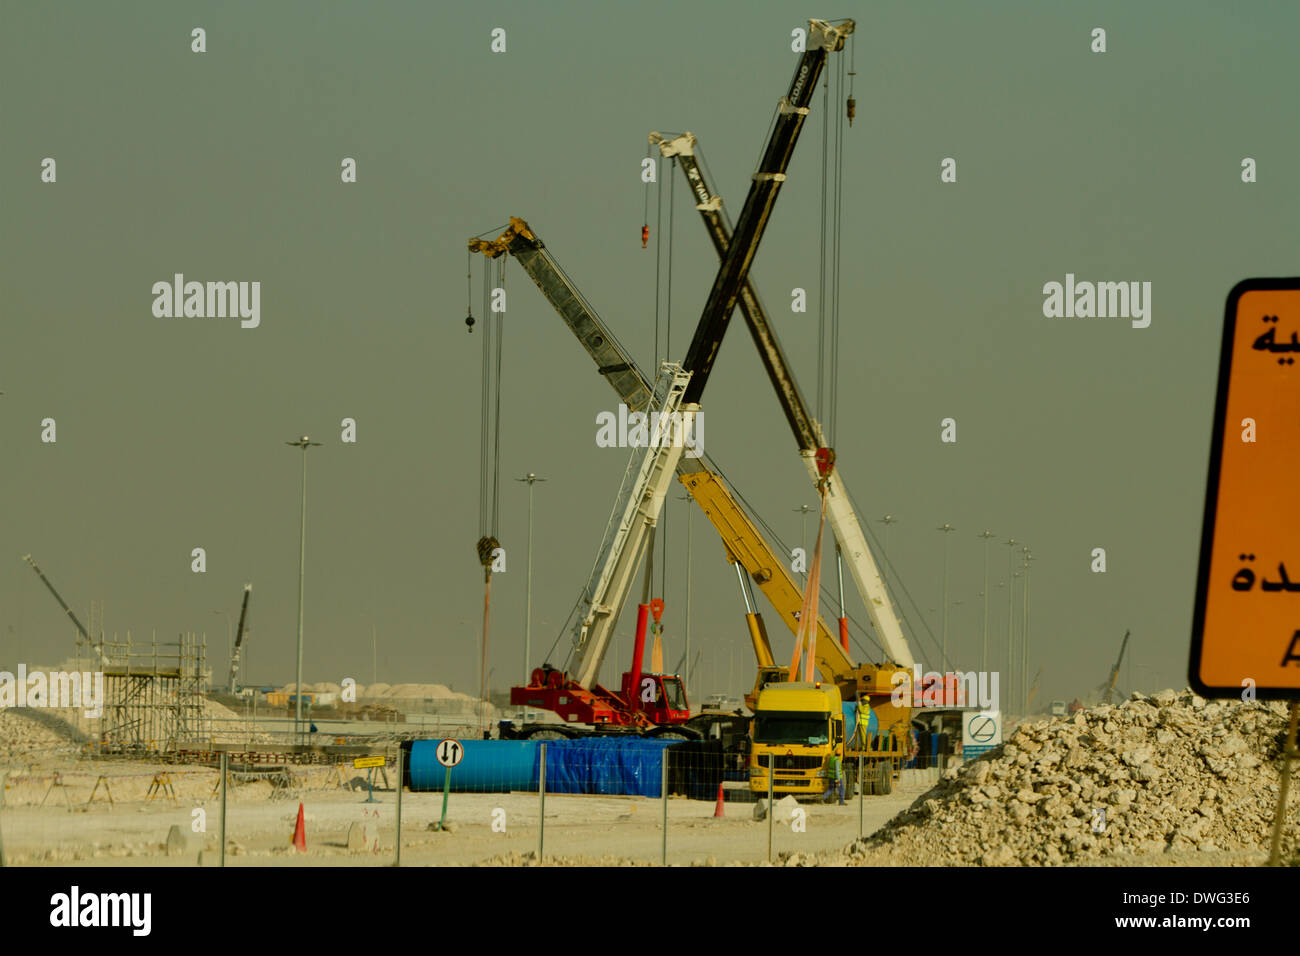 Construction scene in Qatar with cranes and rubble Stock Photo